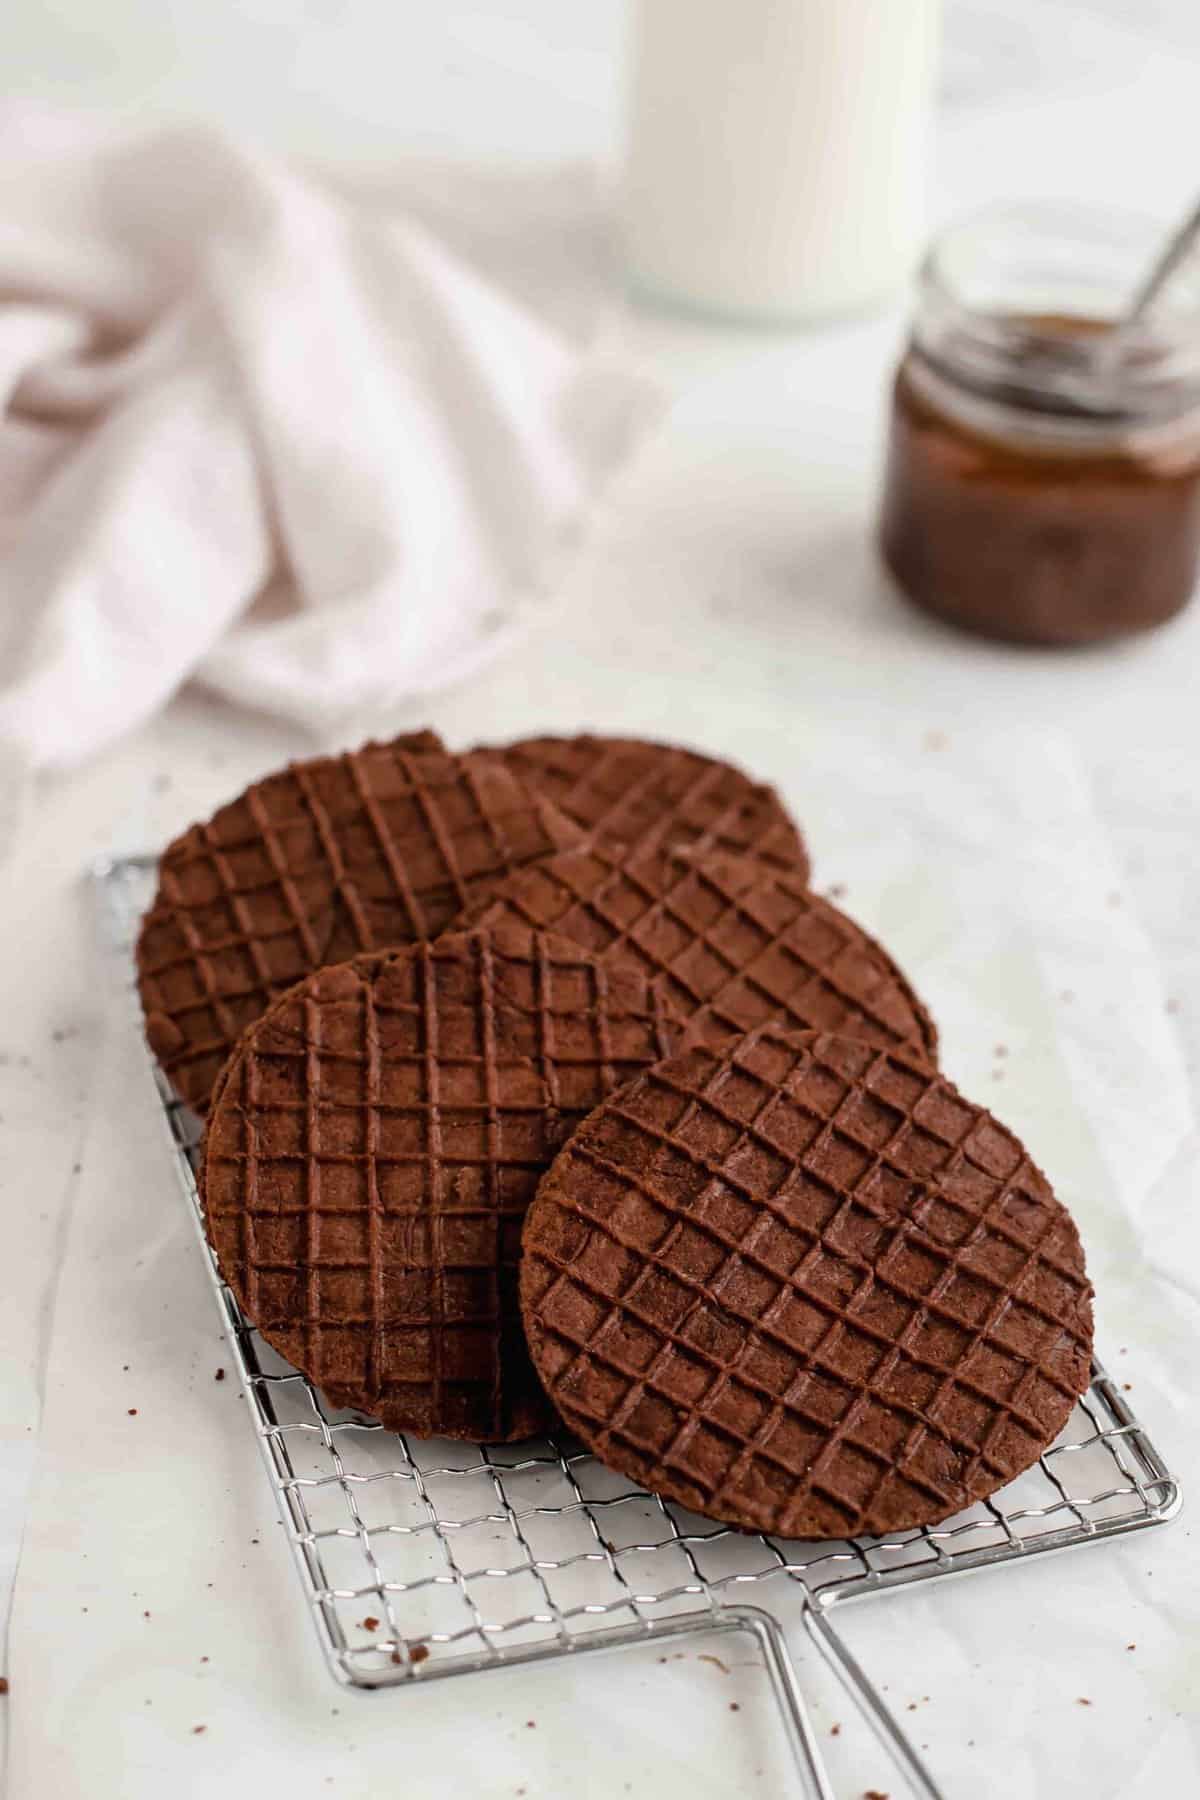 Chocolate stroopwafels laid on a wire rack.